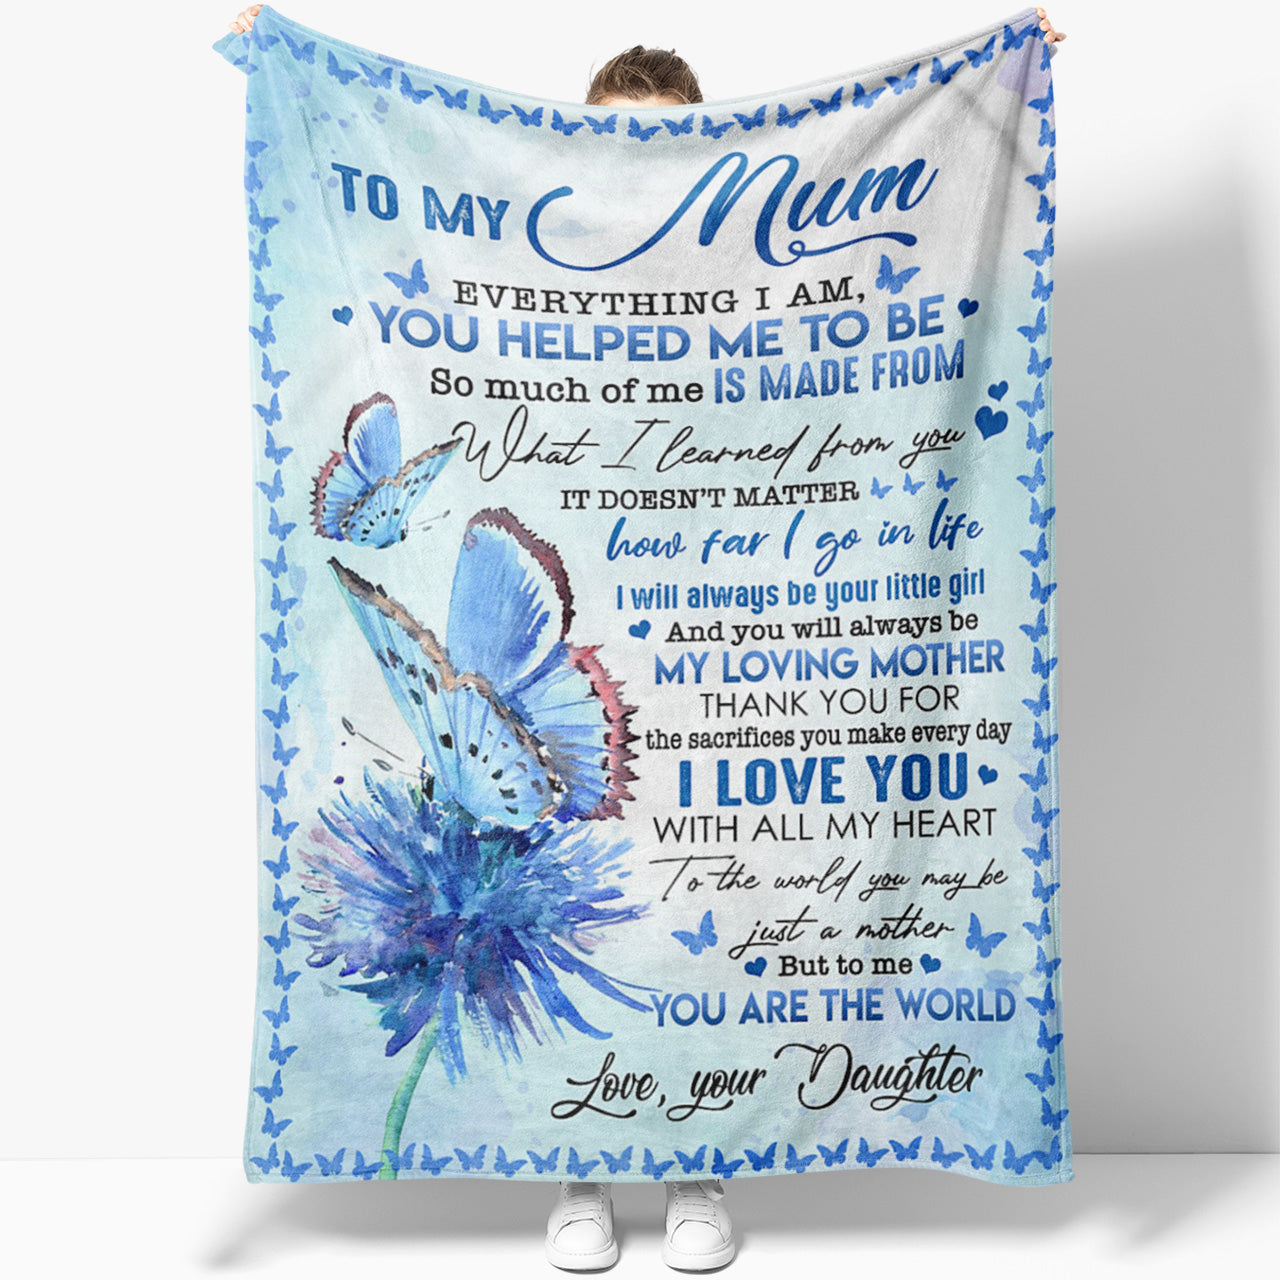 Blanket Gift ideas For Mom, Christmas Gifts For Mom, Its Not Easy Mothers  Day Gifts, Personalized Mothers Day Gifts, A Good Nice Mothers Day Gifts -  Sweet Family Gift